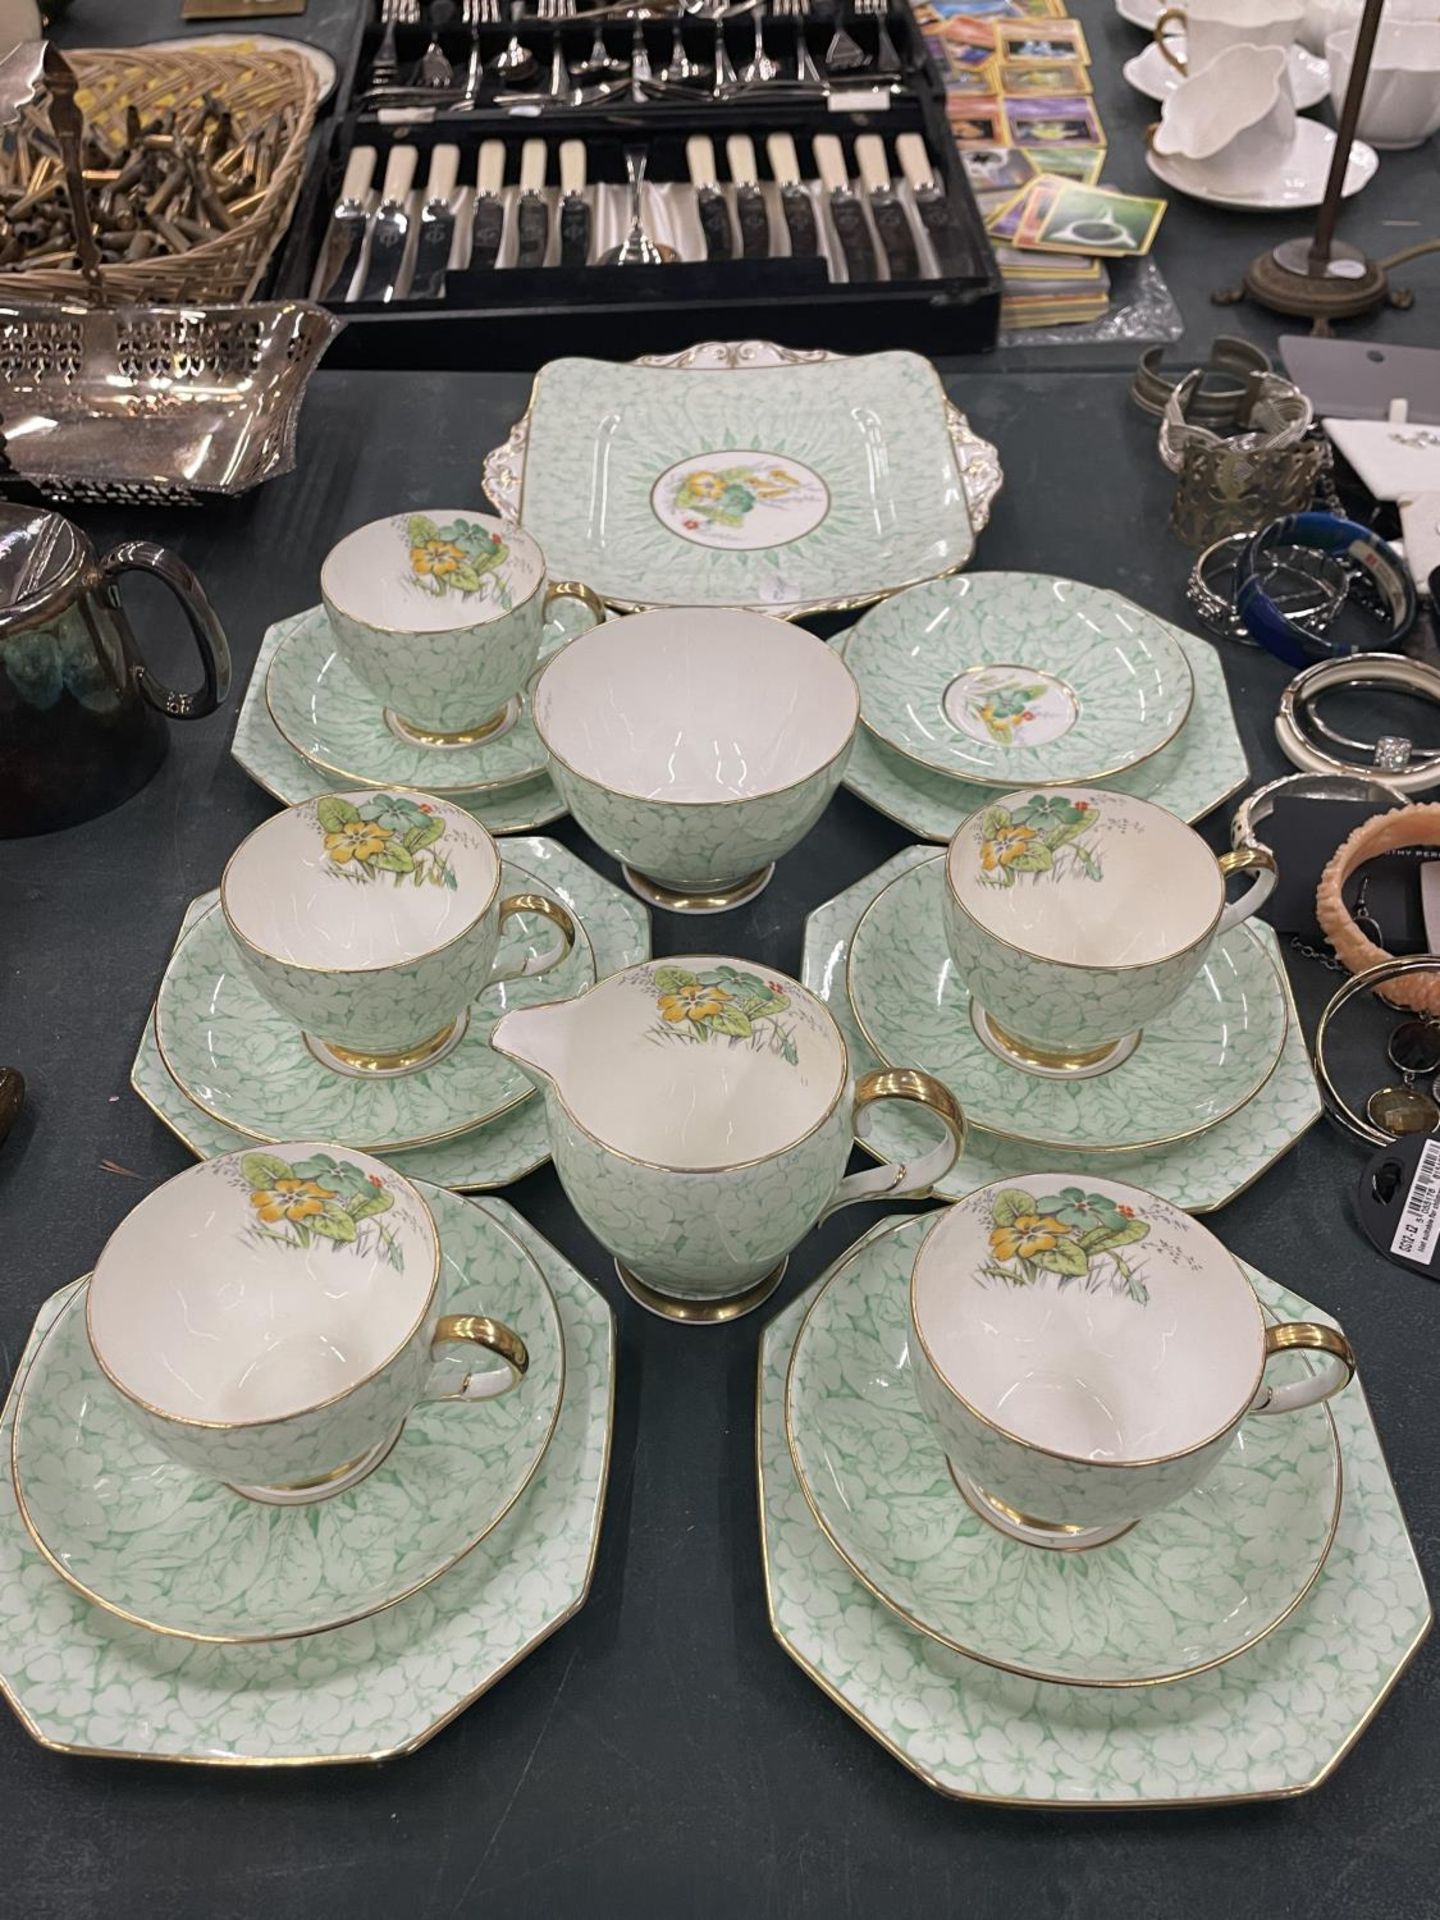 A VINTAGE PARAGON TEASET TO INCLUDE A CAKE PLATE, CREAM JUG, SUGAR BOWL, CUPS SAUCERS AND SIDE